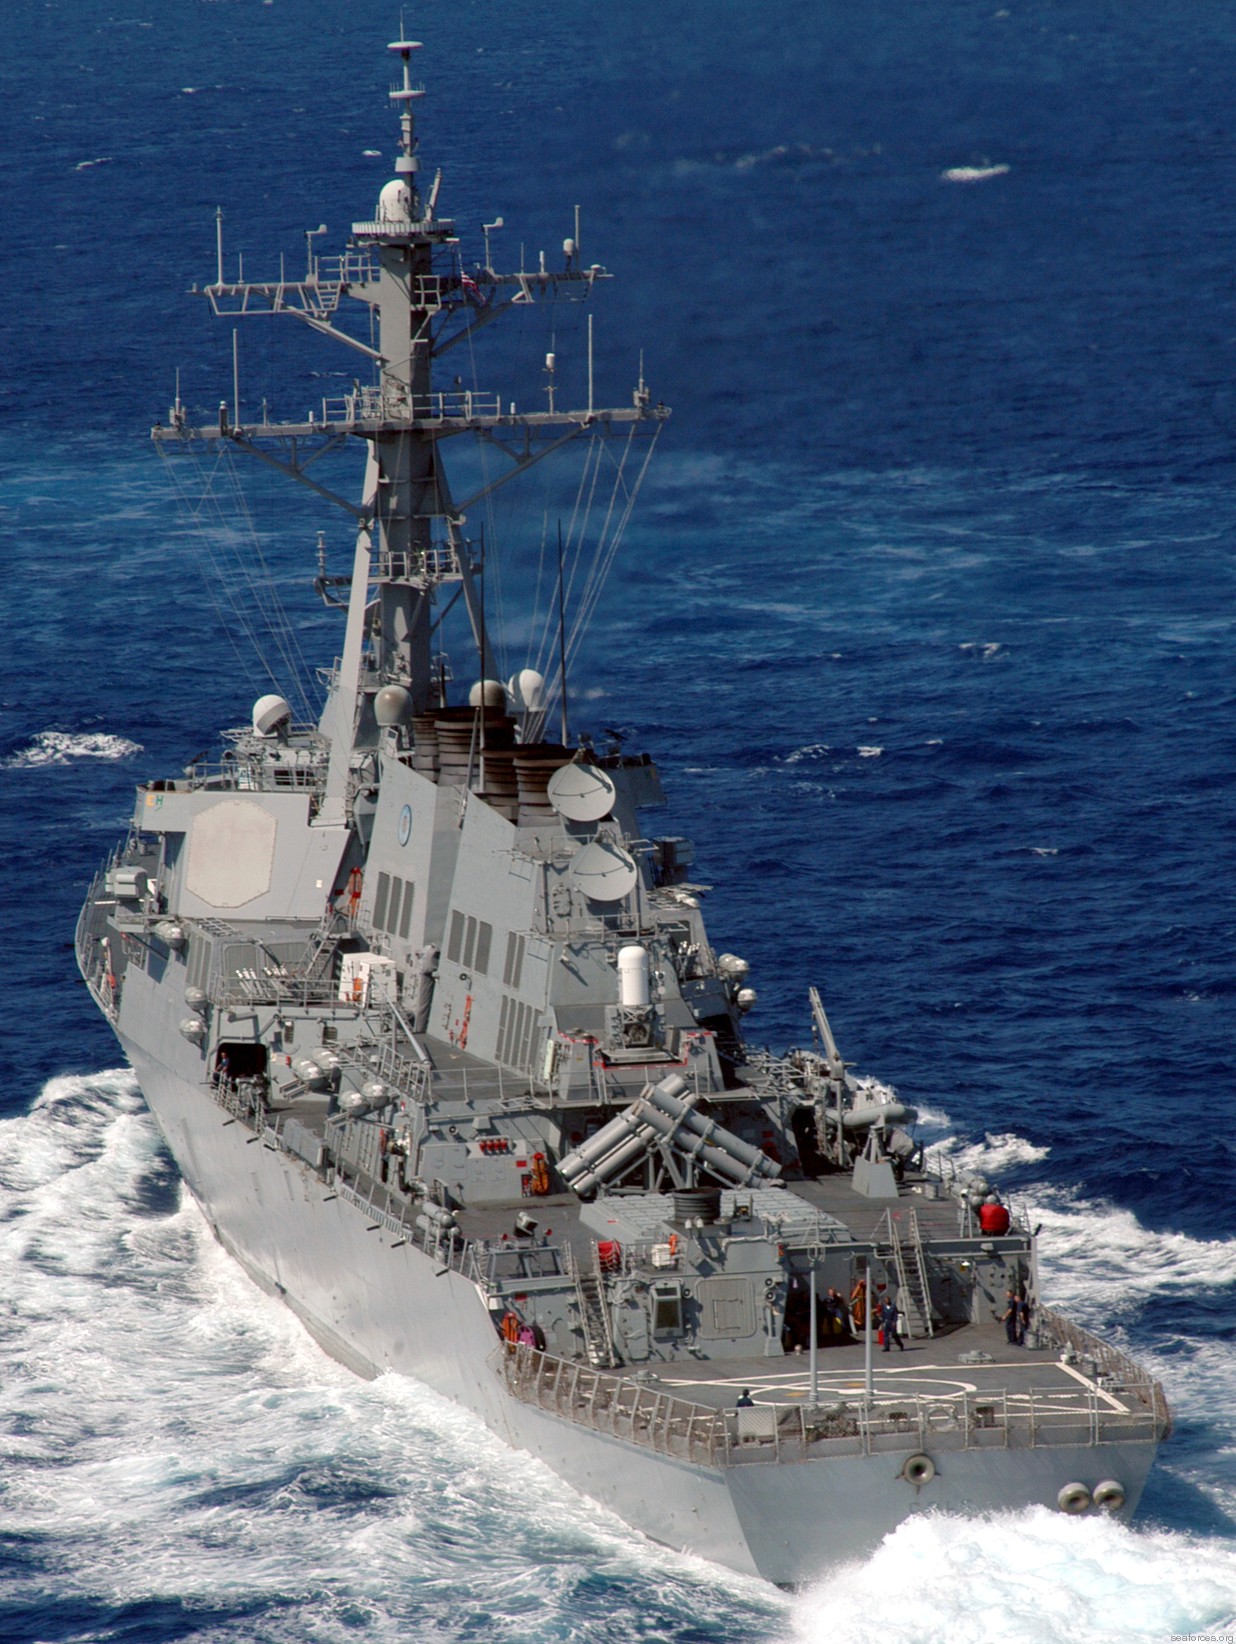 ddg-67 uss cole guided missile destroyer arleigh burke class navy aegis 45